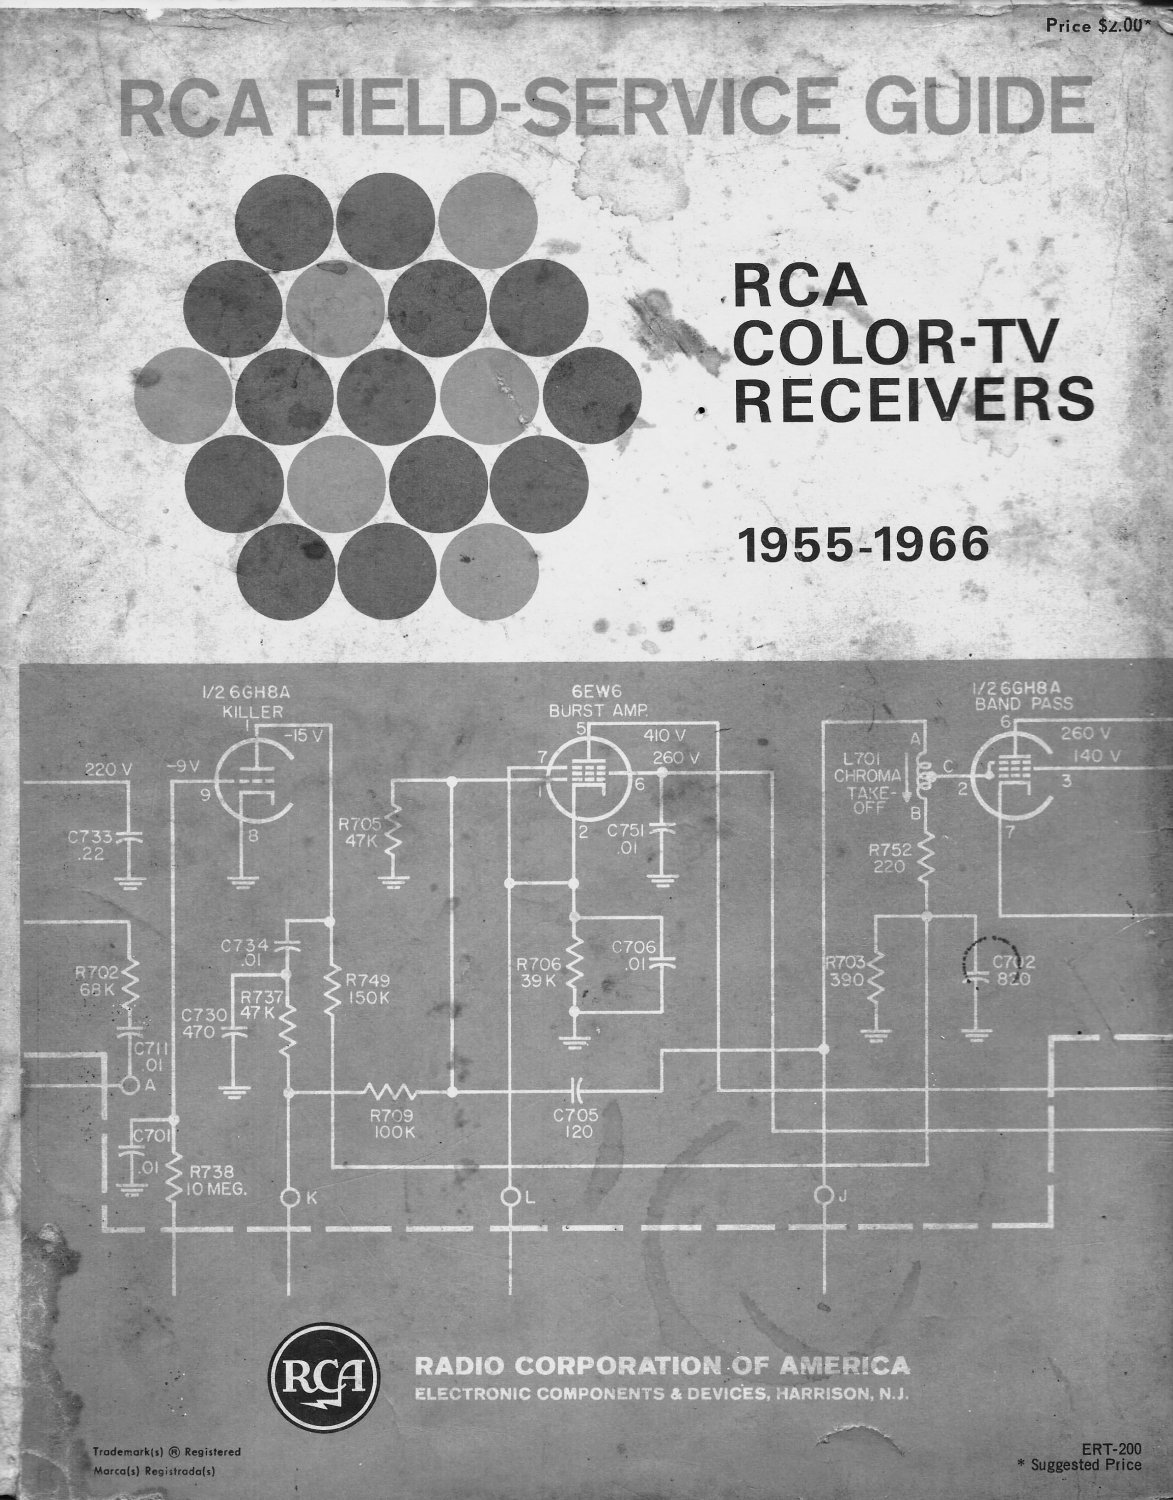 RCA color TV field service guide 55 to 66.jpg